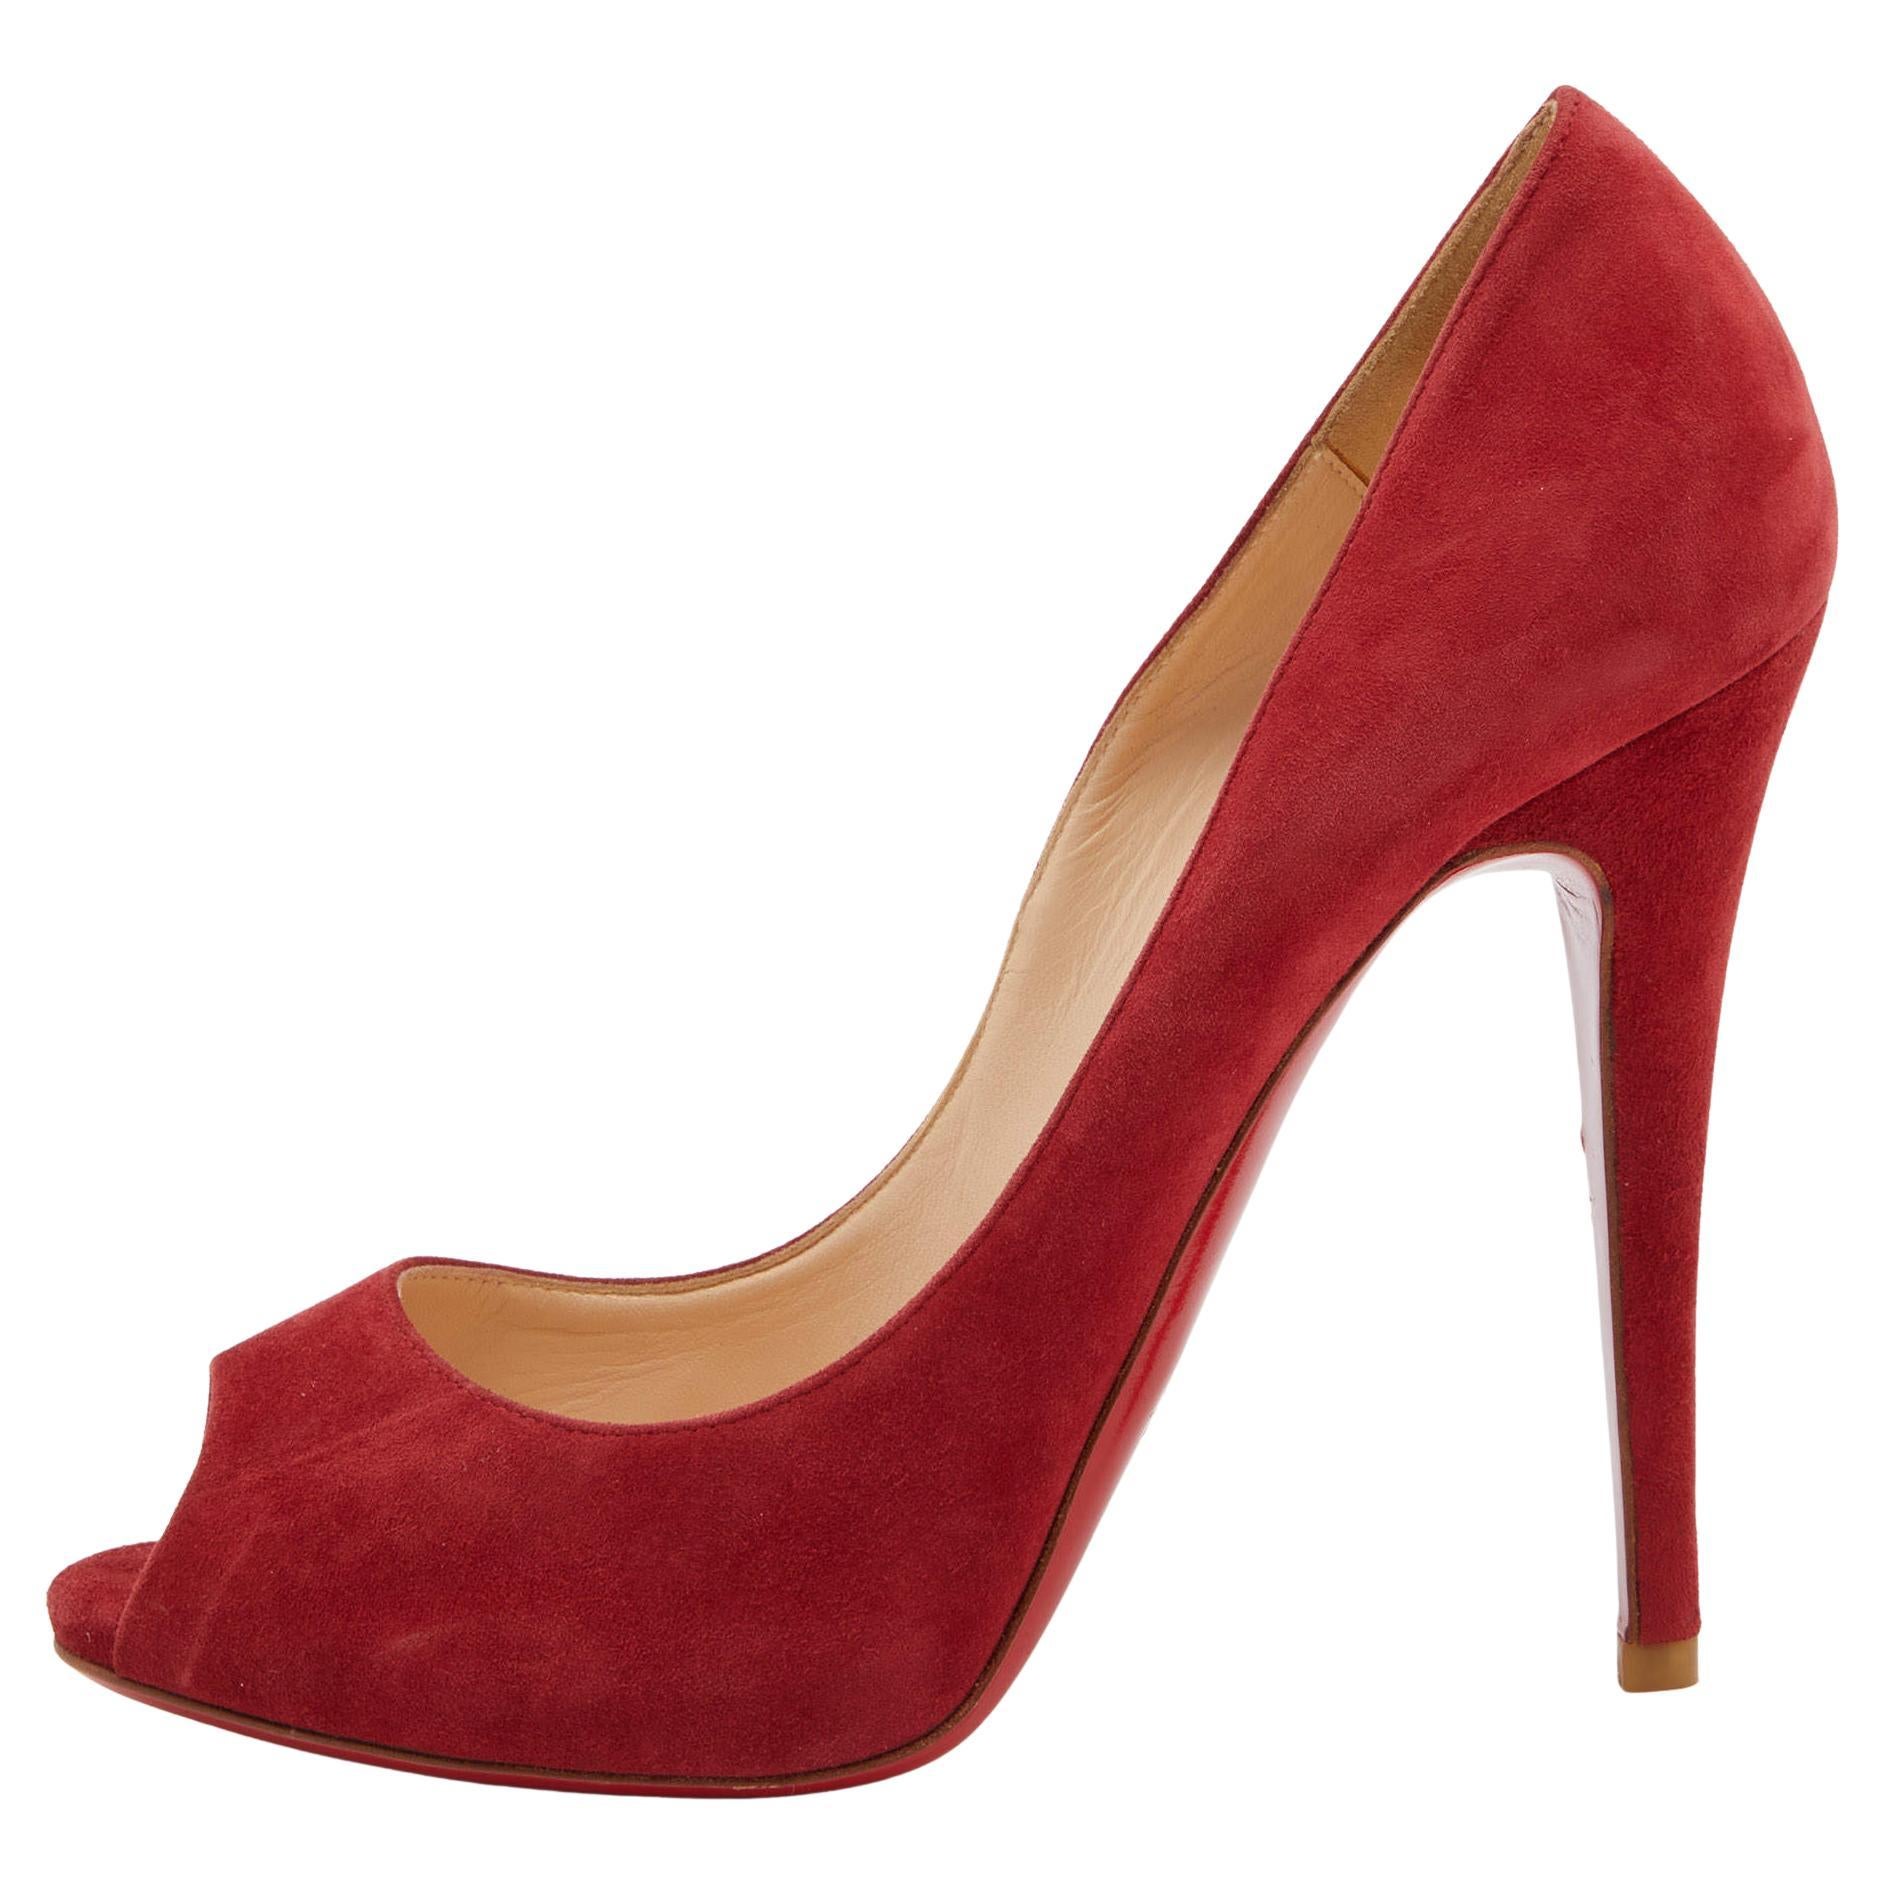 Christian Louboutin Red Suede Hyper Prive Peep Toe Platform Pumps Size 38.5 For Sale